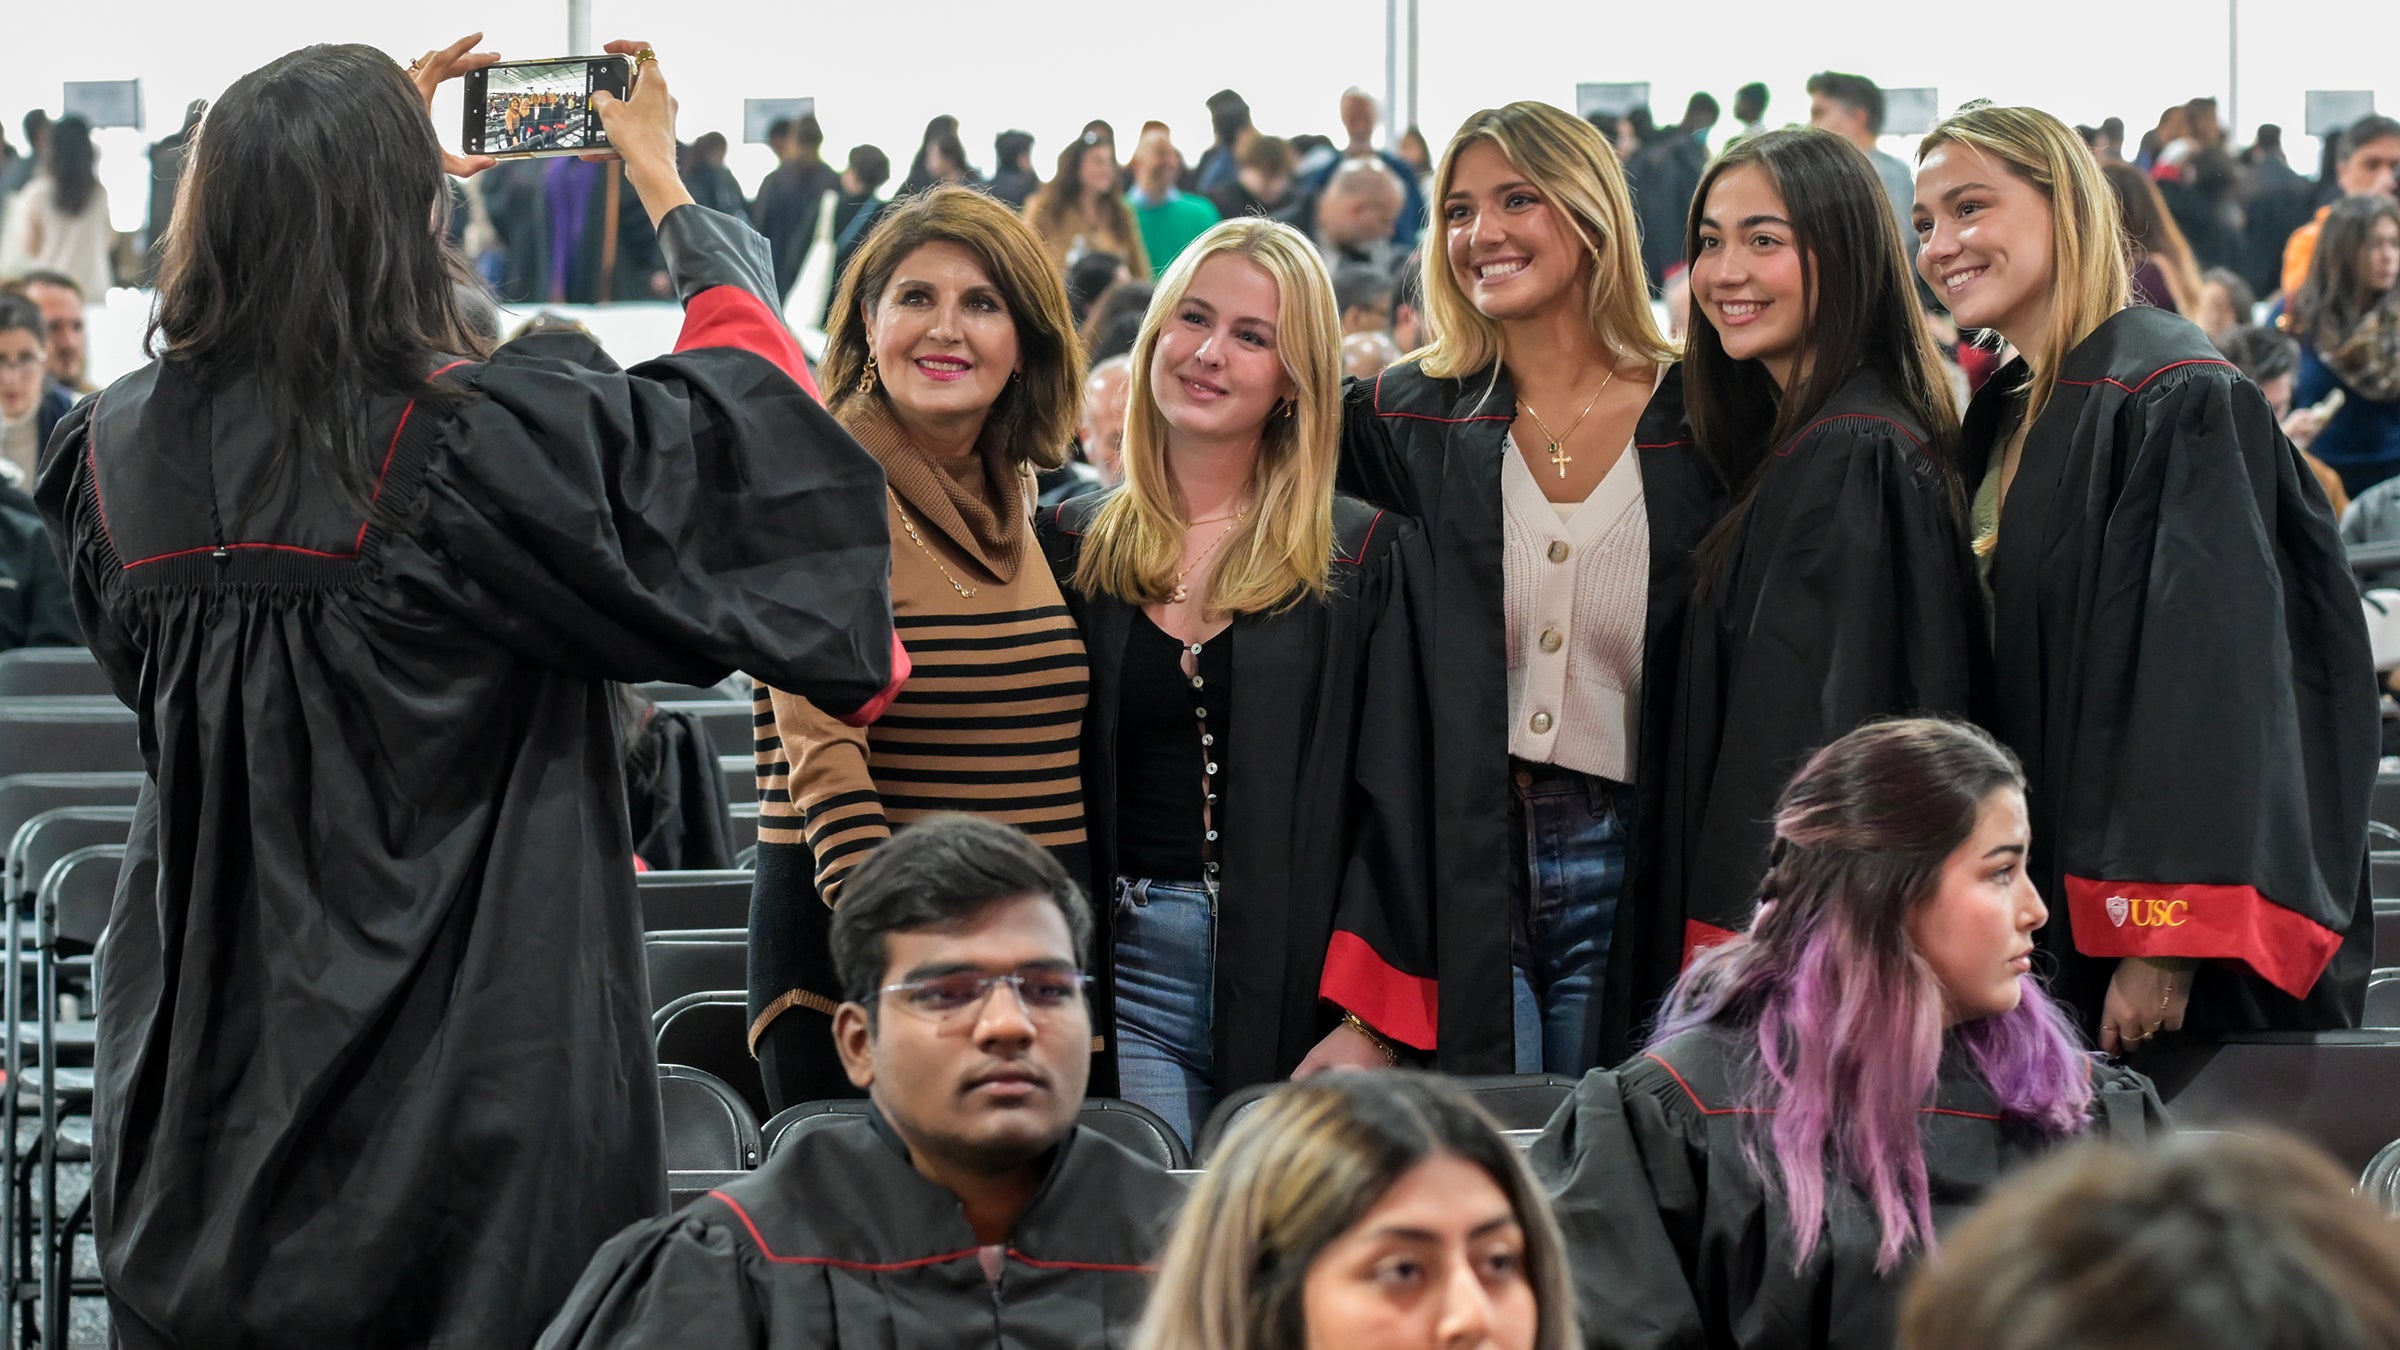 USC spring convocation: Students take photos